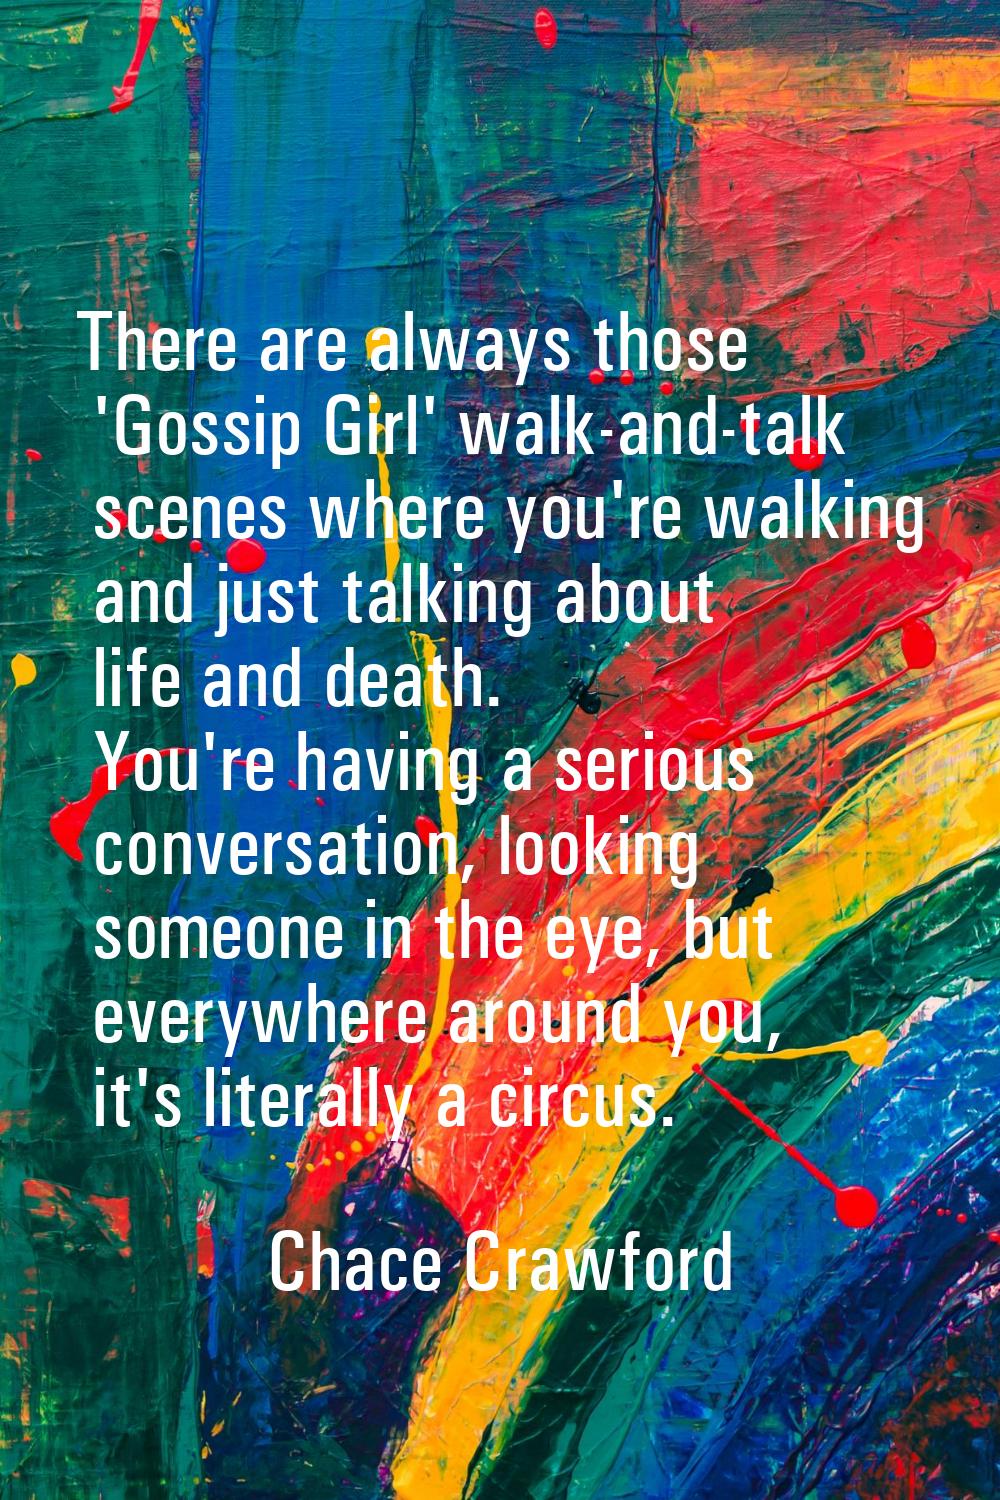 There are always those 'Gossip Girl' walk-and-talk scenes where you're walking and just talking abo